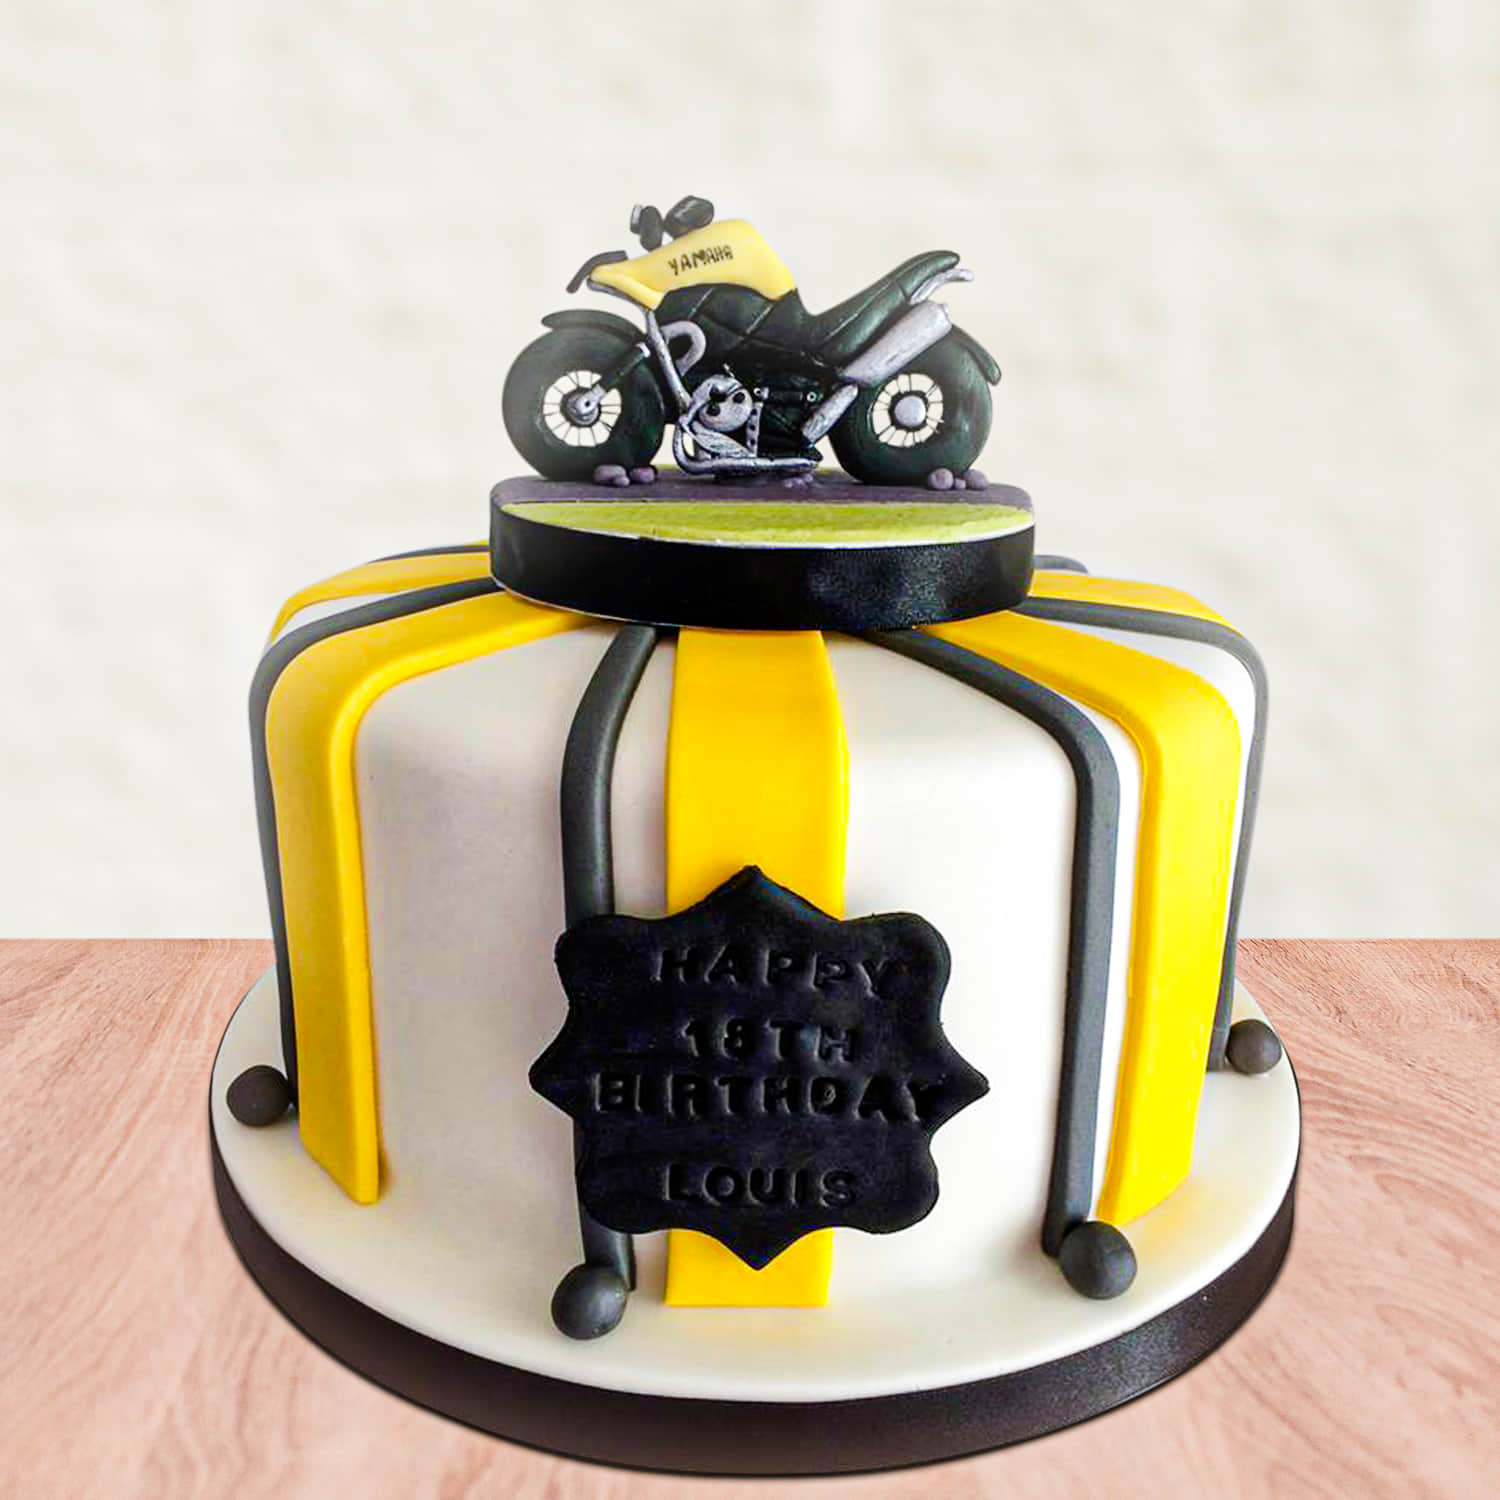 Sally's Sweet Creations - A stack of tires birthday cake for a new 6 year  old. Each tire is a separate white cake, split and filled with chocolate.  As usual with a